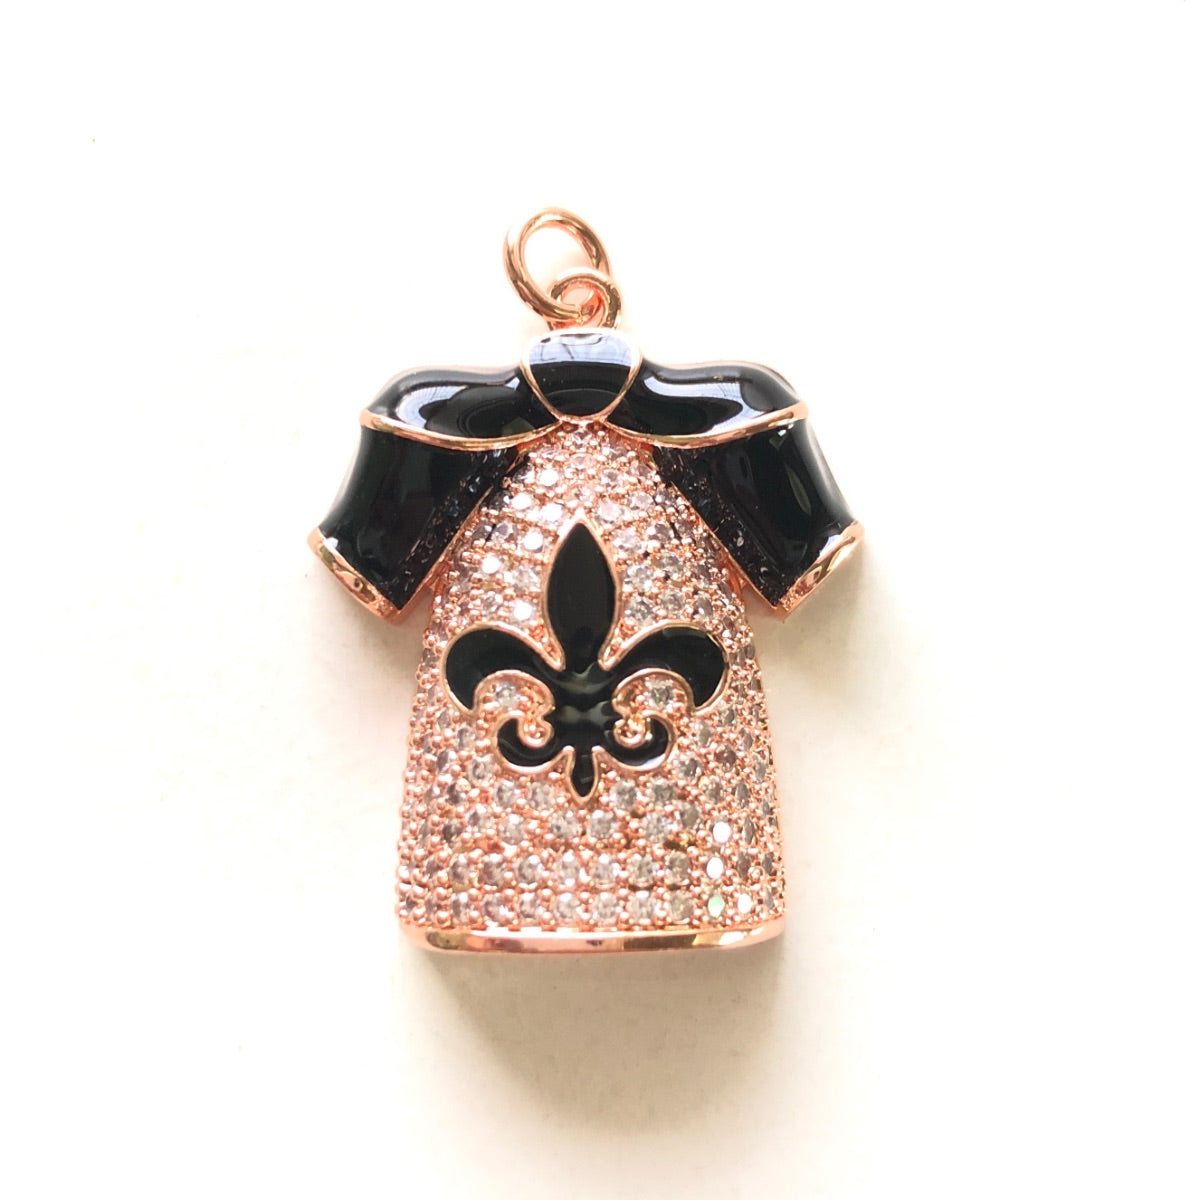 10pcs/lot 33*27mm Fleur De Lis CZ Saints Football Uniform Suit Jersey Charms Rose Gold CZ Paved Charms American Football Sports Louisiana Inspired New Charms Arrivals Charms Beads Beyond